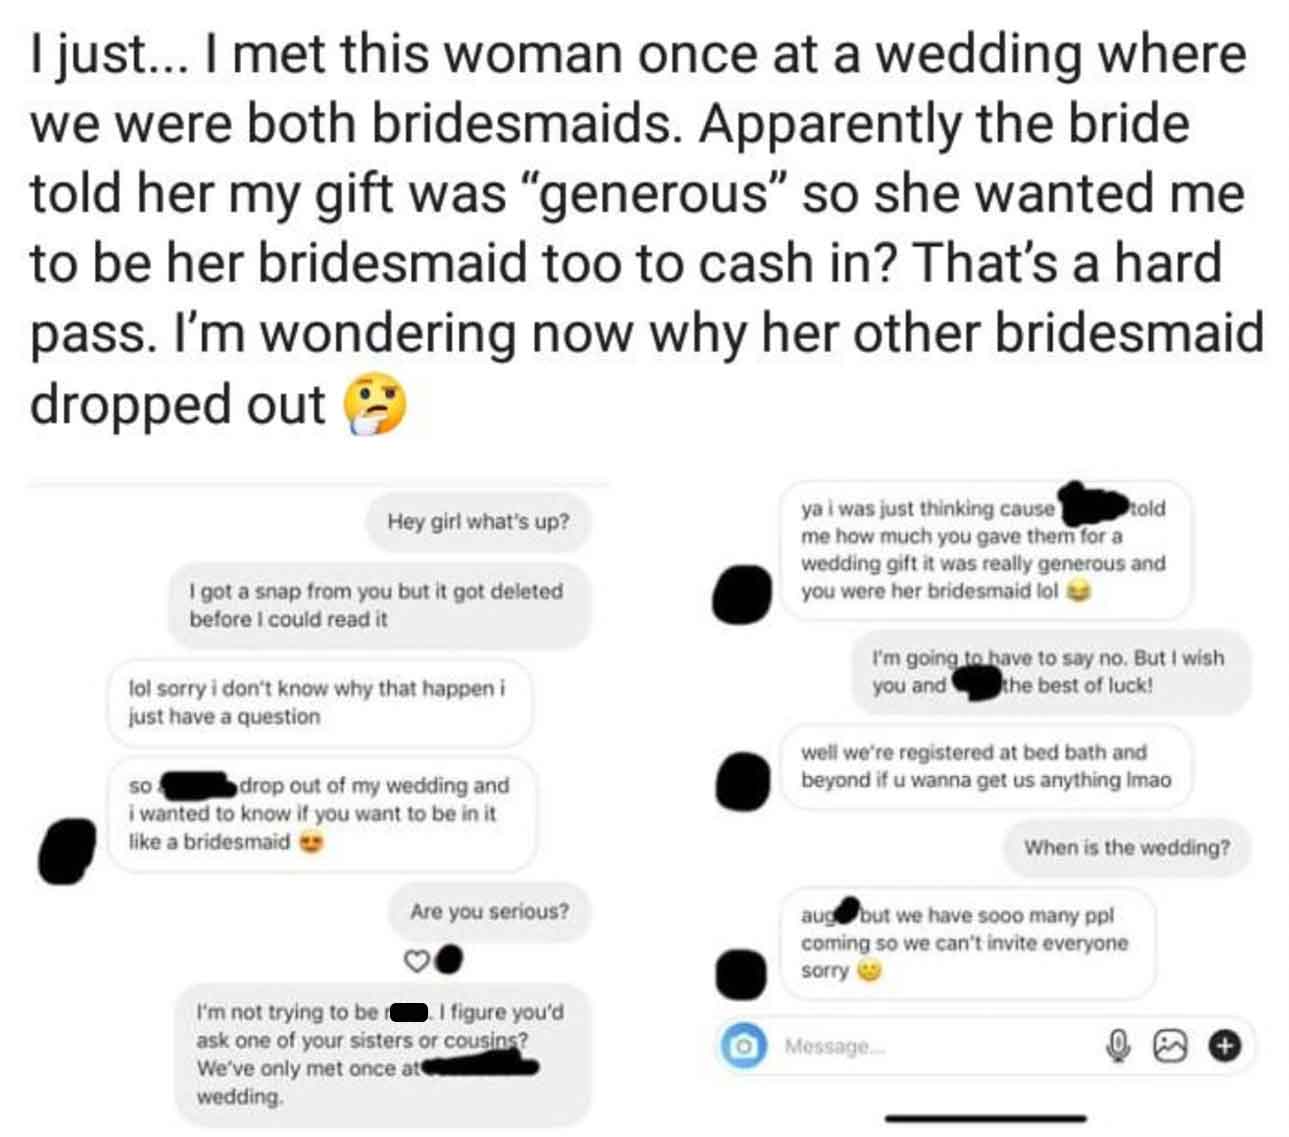 screenshot - I just... I met this woman once at a wedding where we were both bridesmaids. Apparently the bride told her my gift was "generous" so she wanted me to be her bridesmaid too to cash in? That's a hard pass. I'm wondering now why her other brides